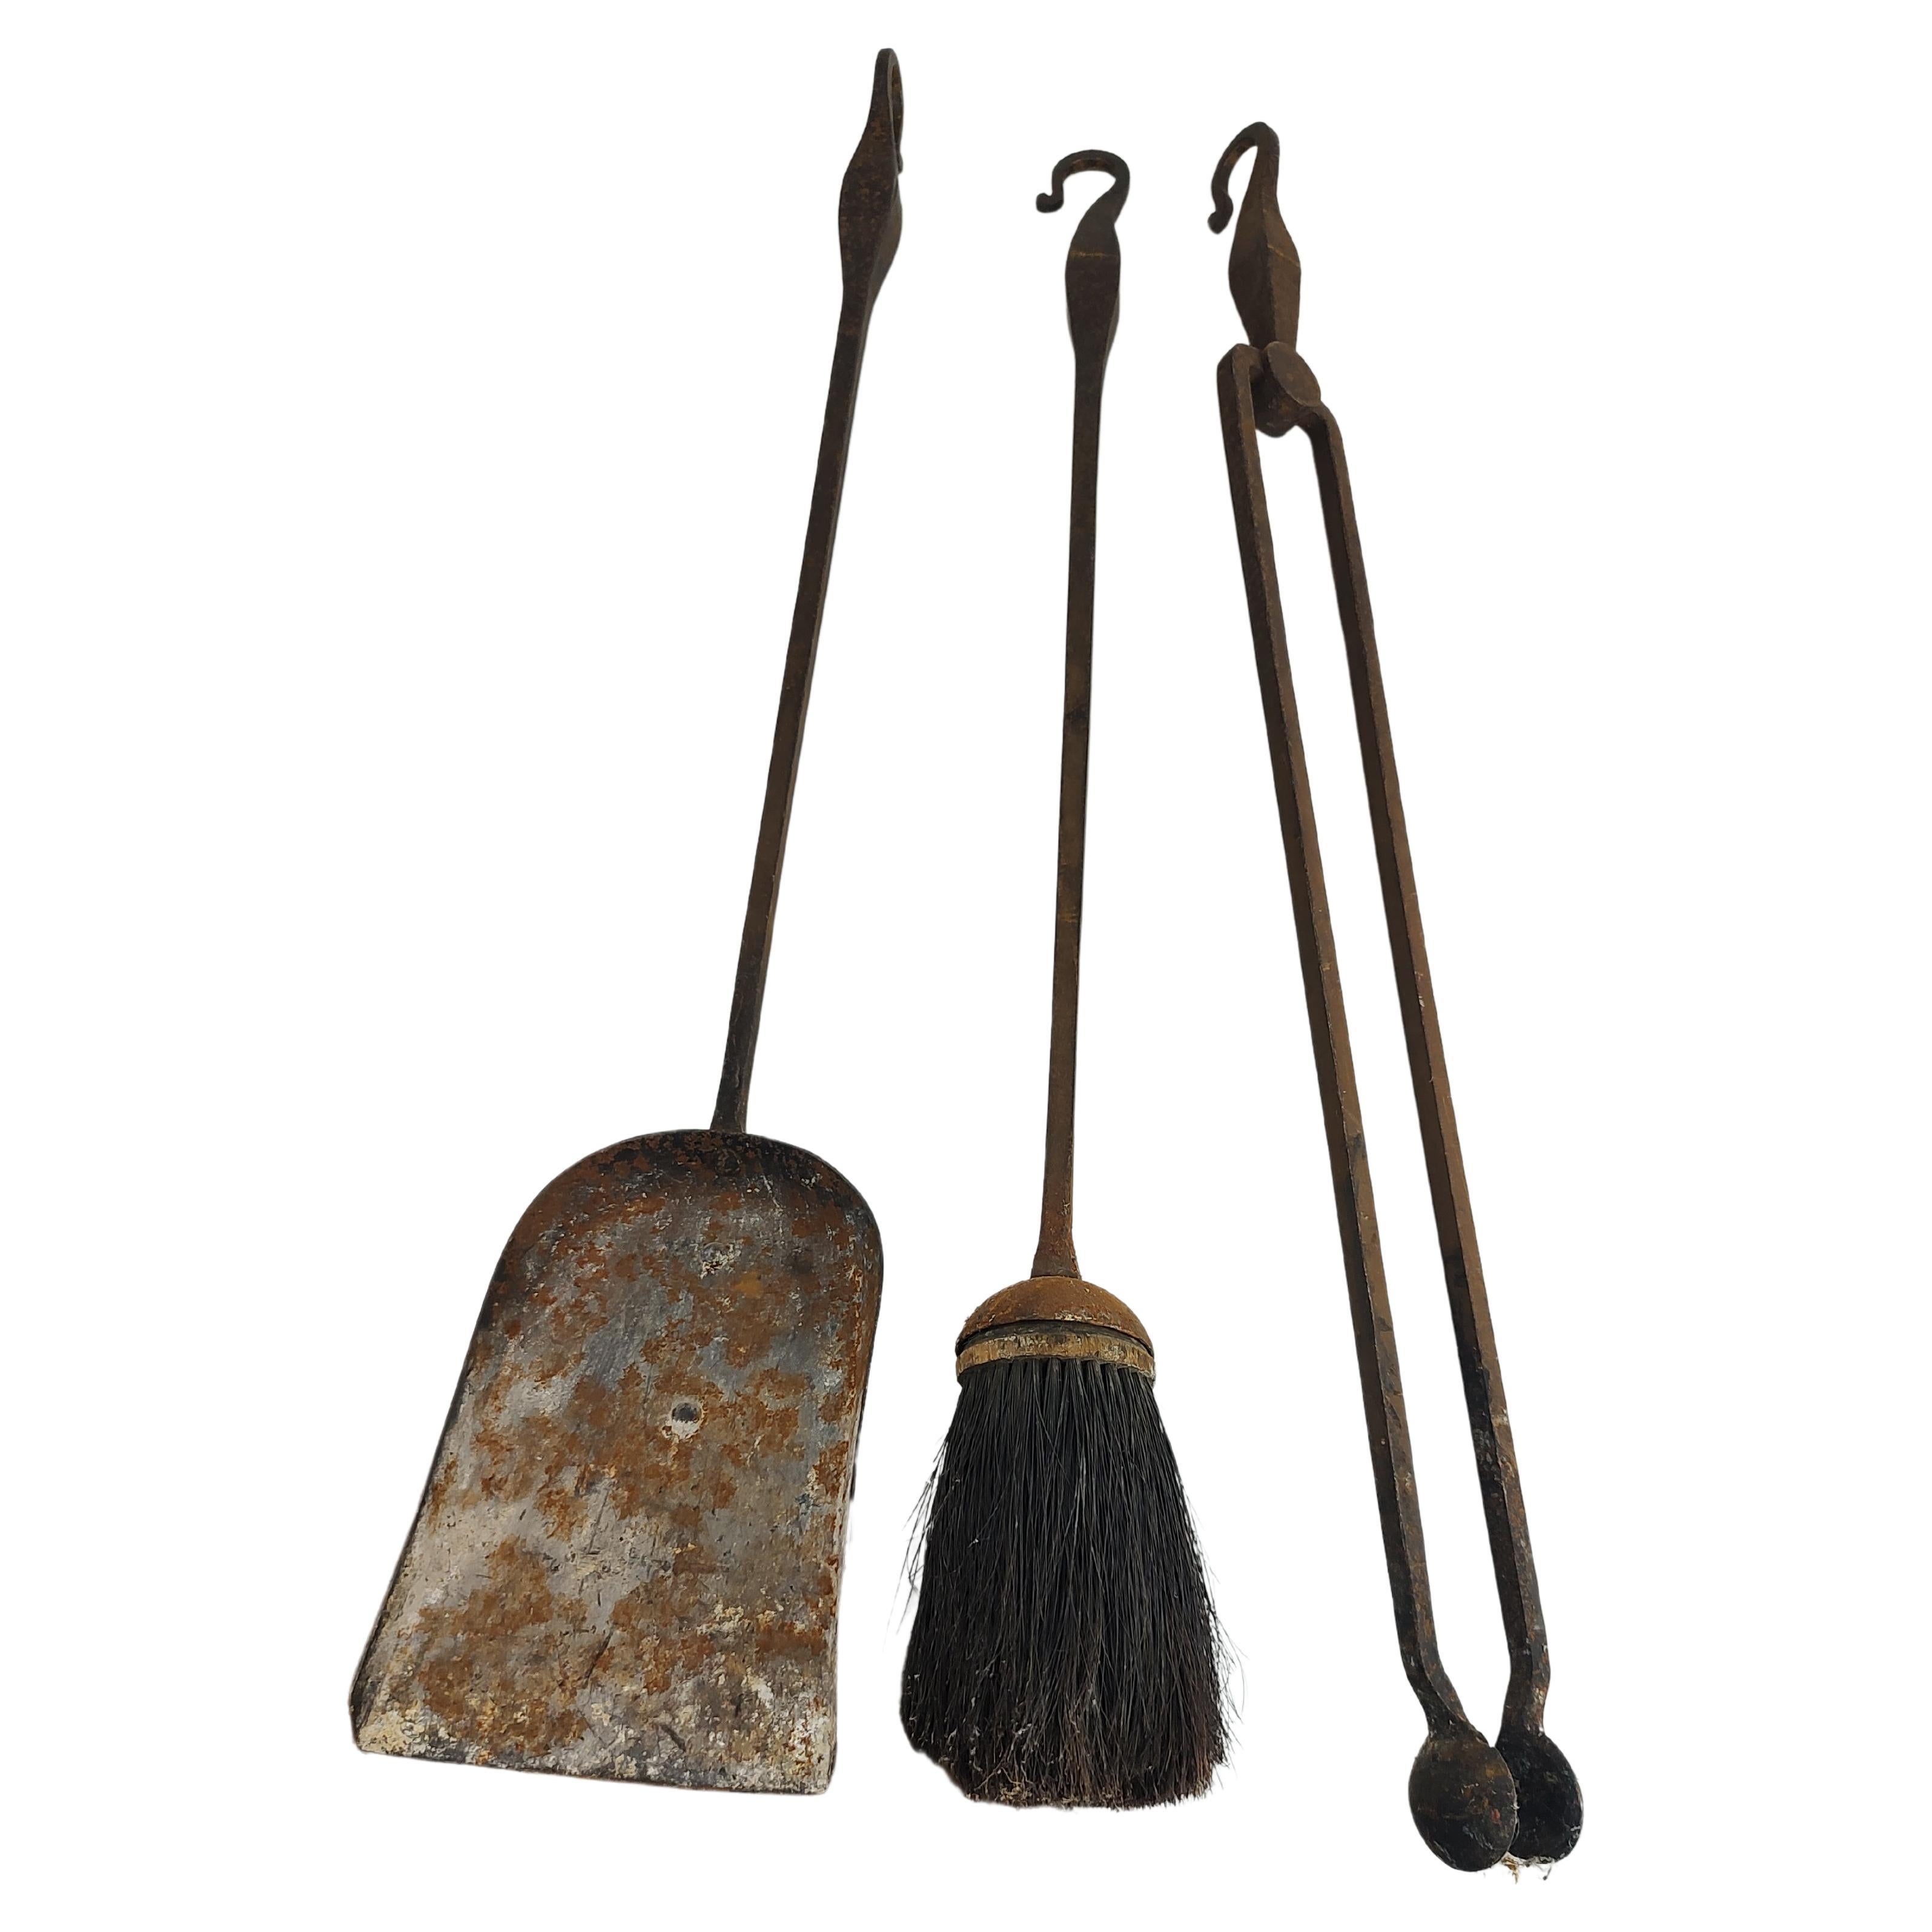 Cast 19th Century Hand Forged Iron Fireplace Tools 4 Piece Set For Sale